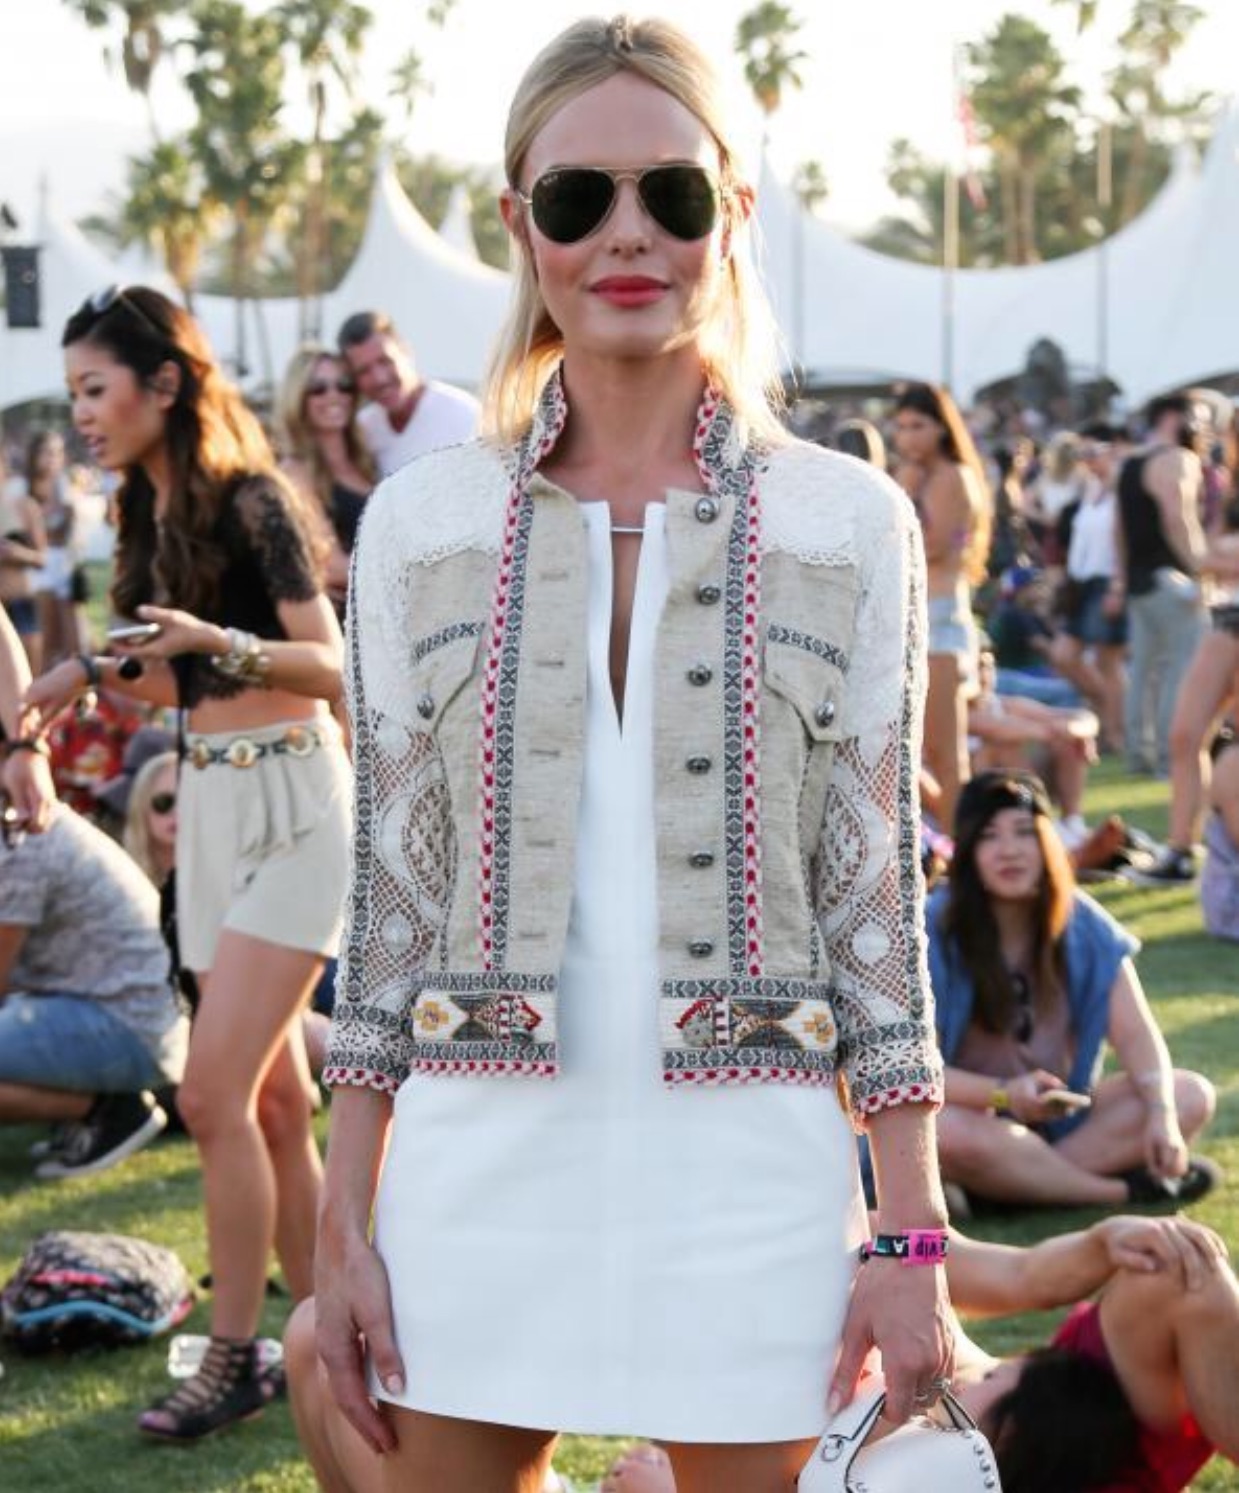 THE BEST OFFSTAGE LOOKS AS SEEN AT COACHELLA - V Magazine